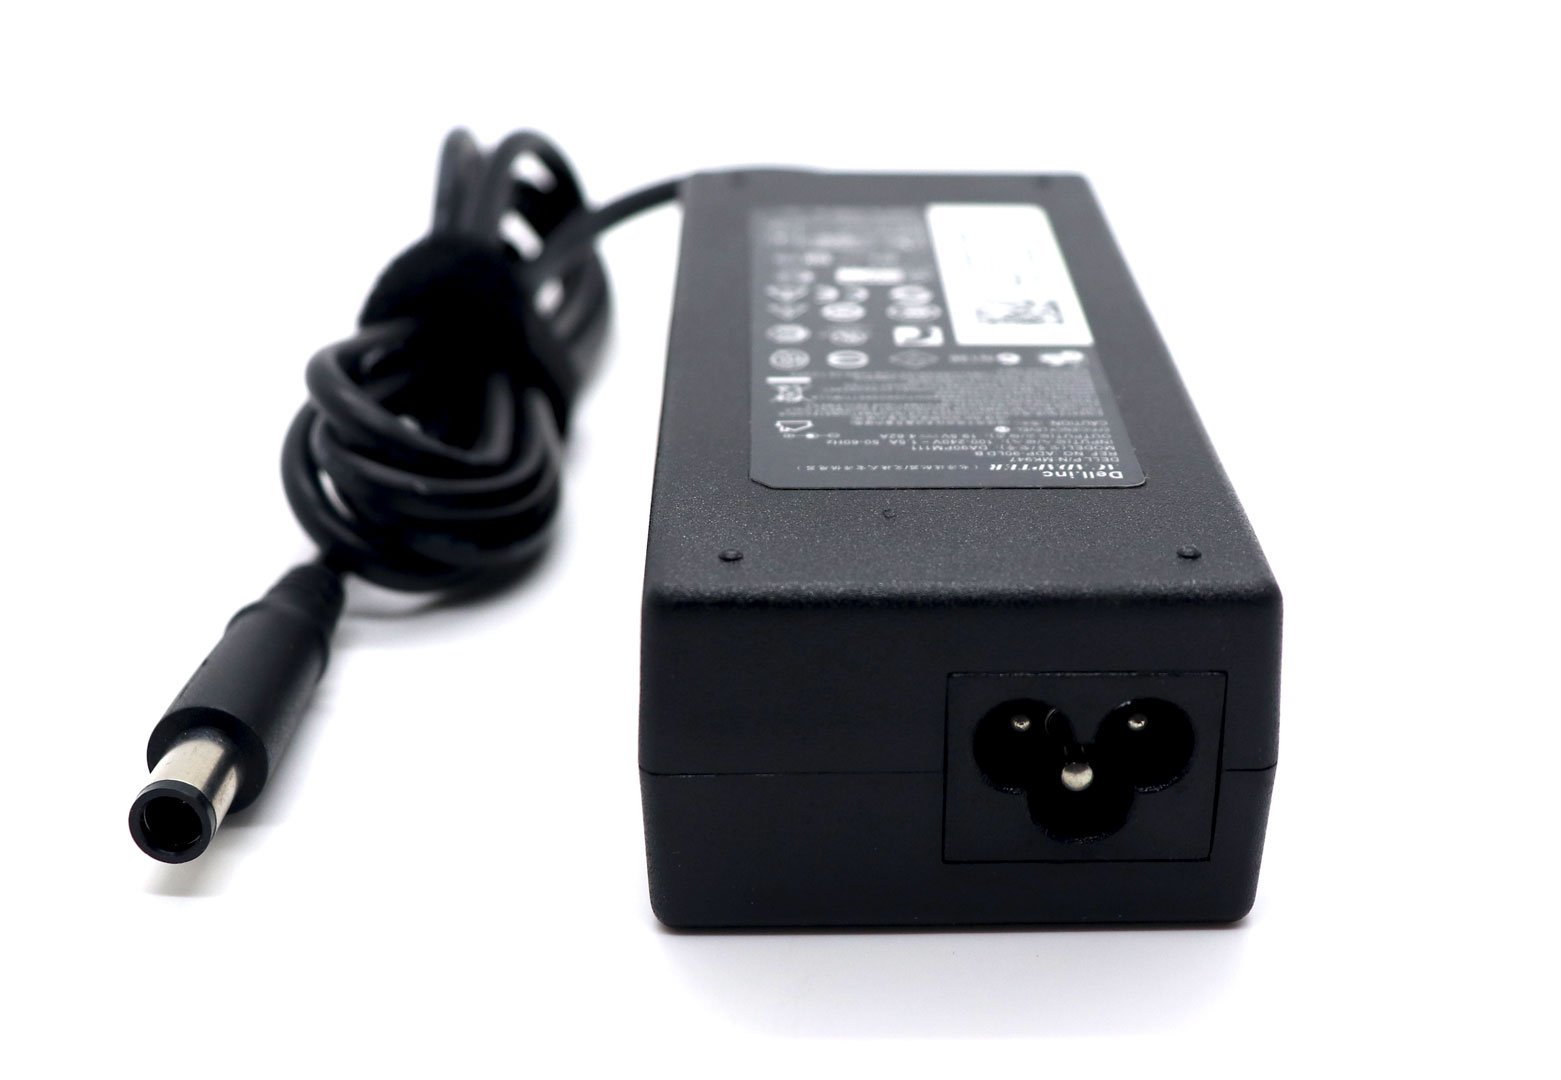 Dell Inspiron 17R N7110 Original 90W 19.5V 4.62A 7.4mm Pin Laptop Adapter Charger